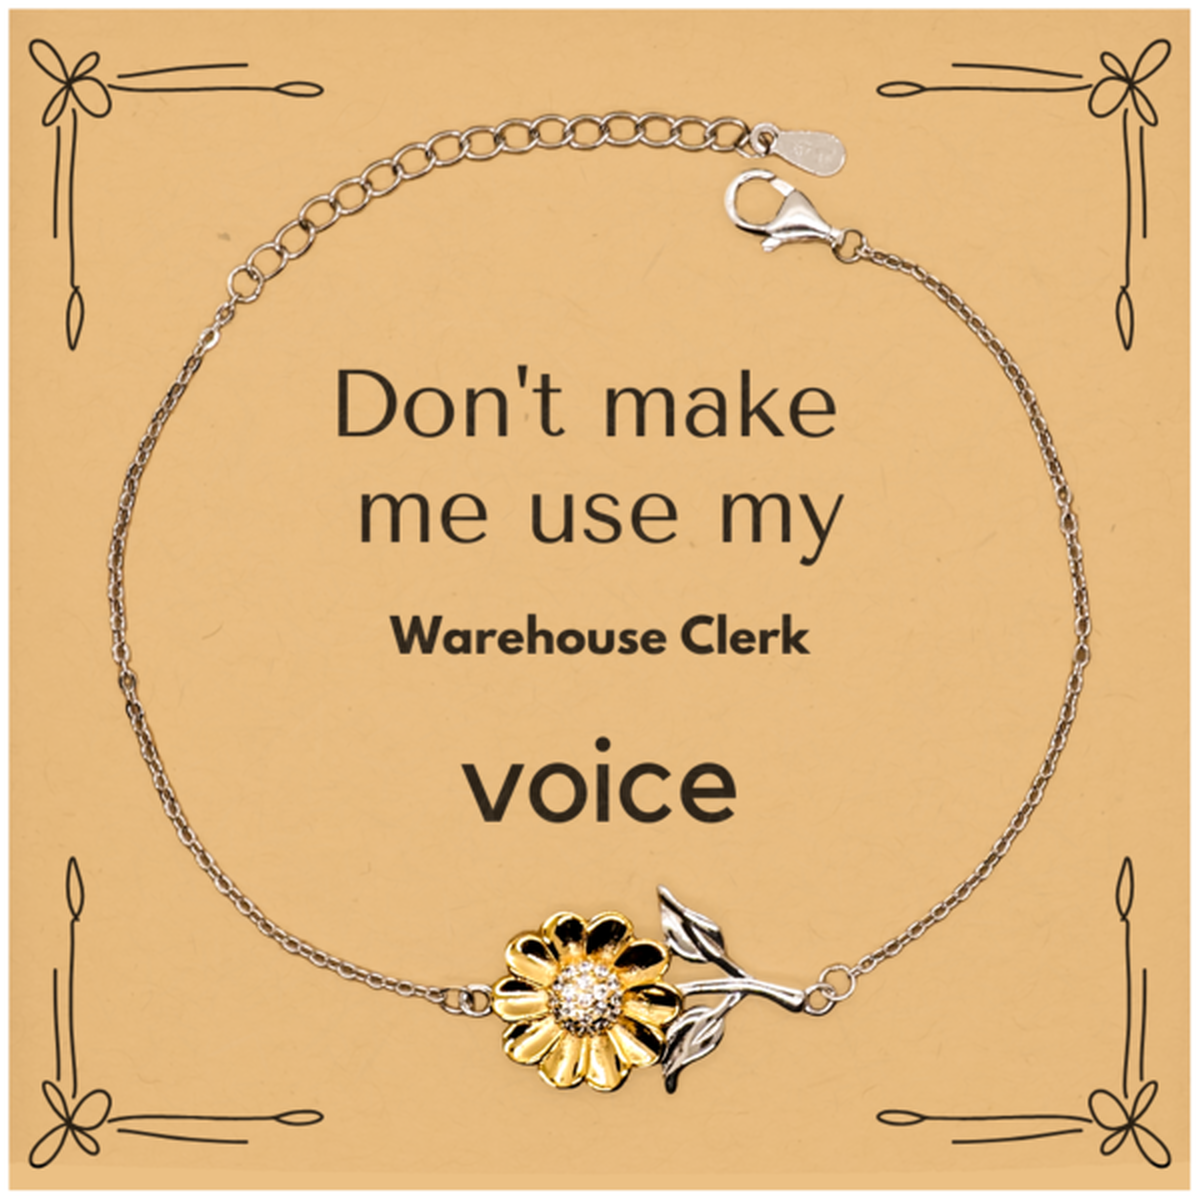 Don't make me use my Warehouse Clerk voice, Sarcasm Warehouse Clerk Card Gifts, Christmas Warehouse Clerk Sunflower Bracelet Birthday Unique Gifts For Warehouse Clerk Coworkers, Men, Women, Colleague, Friends